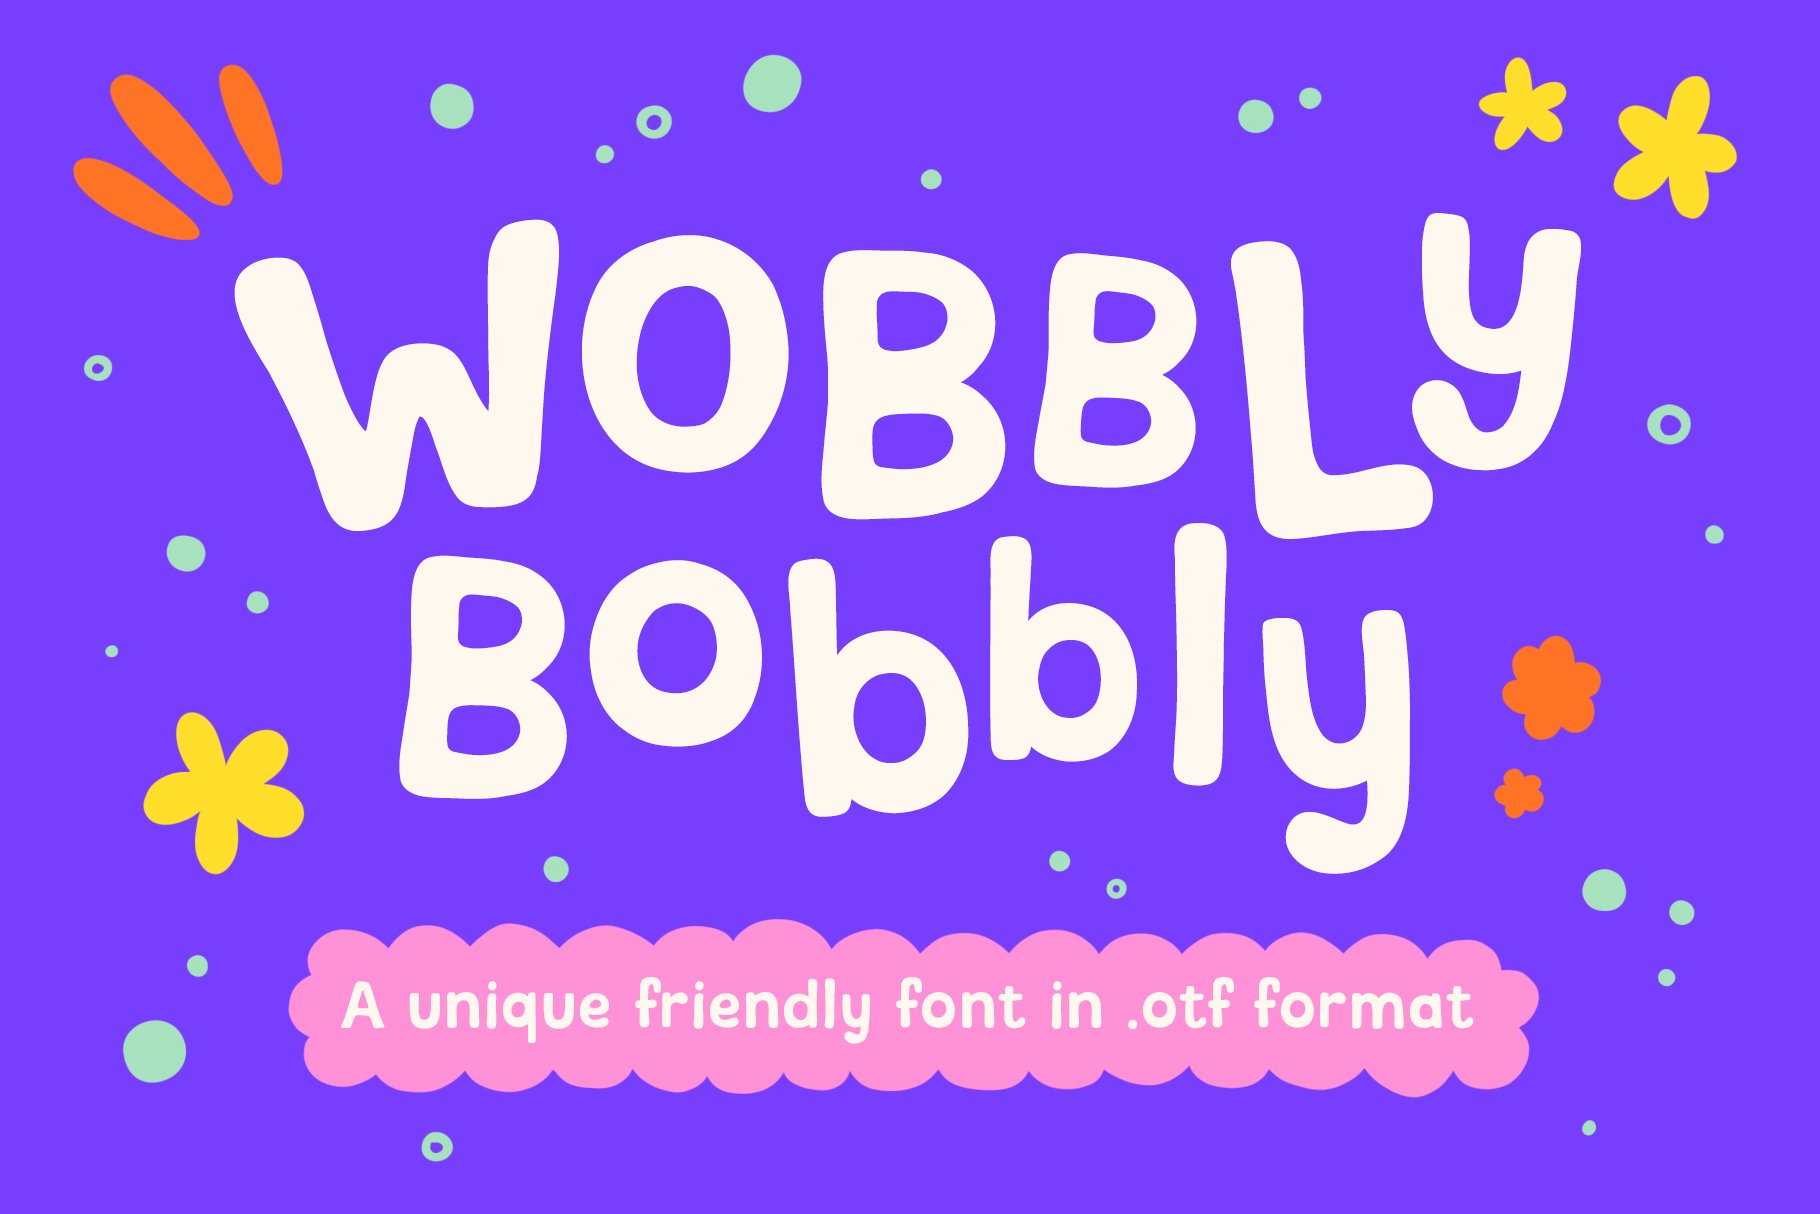 Wobbly Bobbly - Handwritten font cover image.